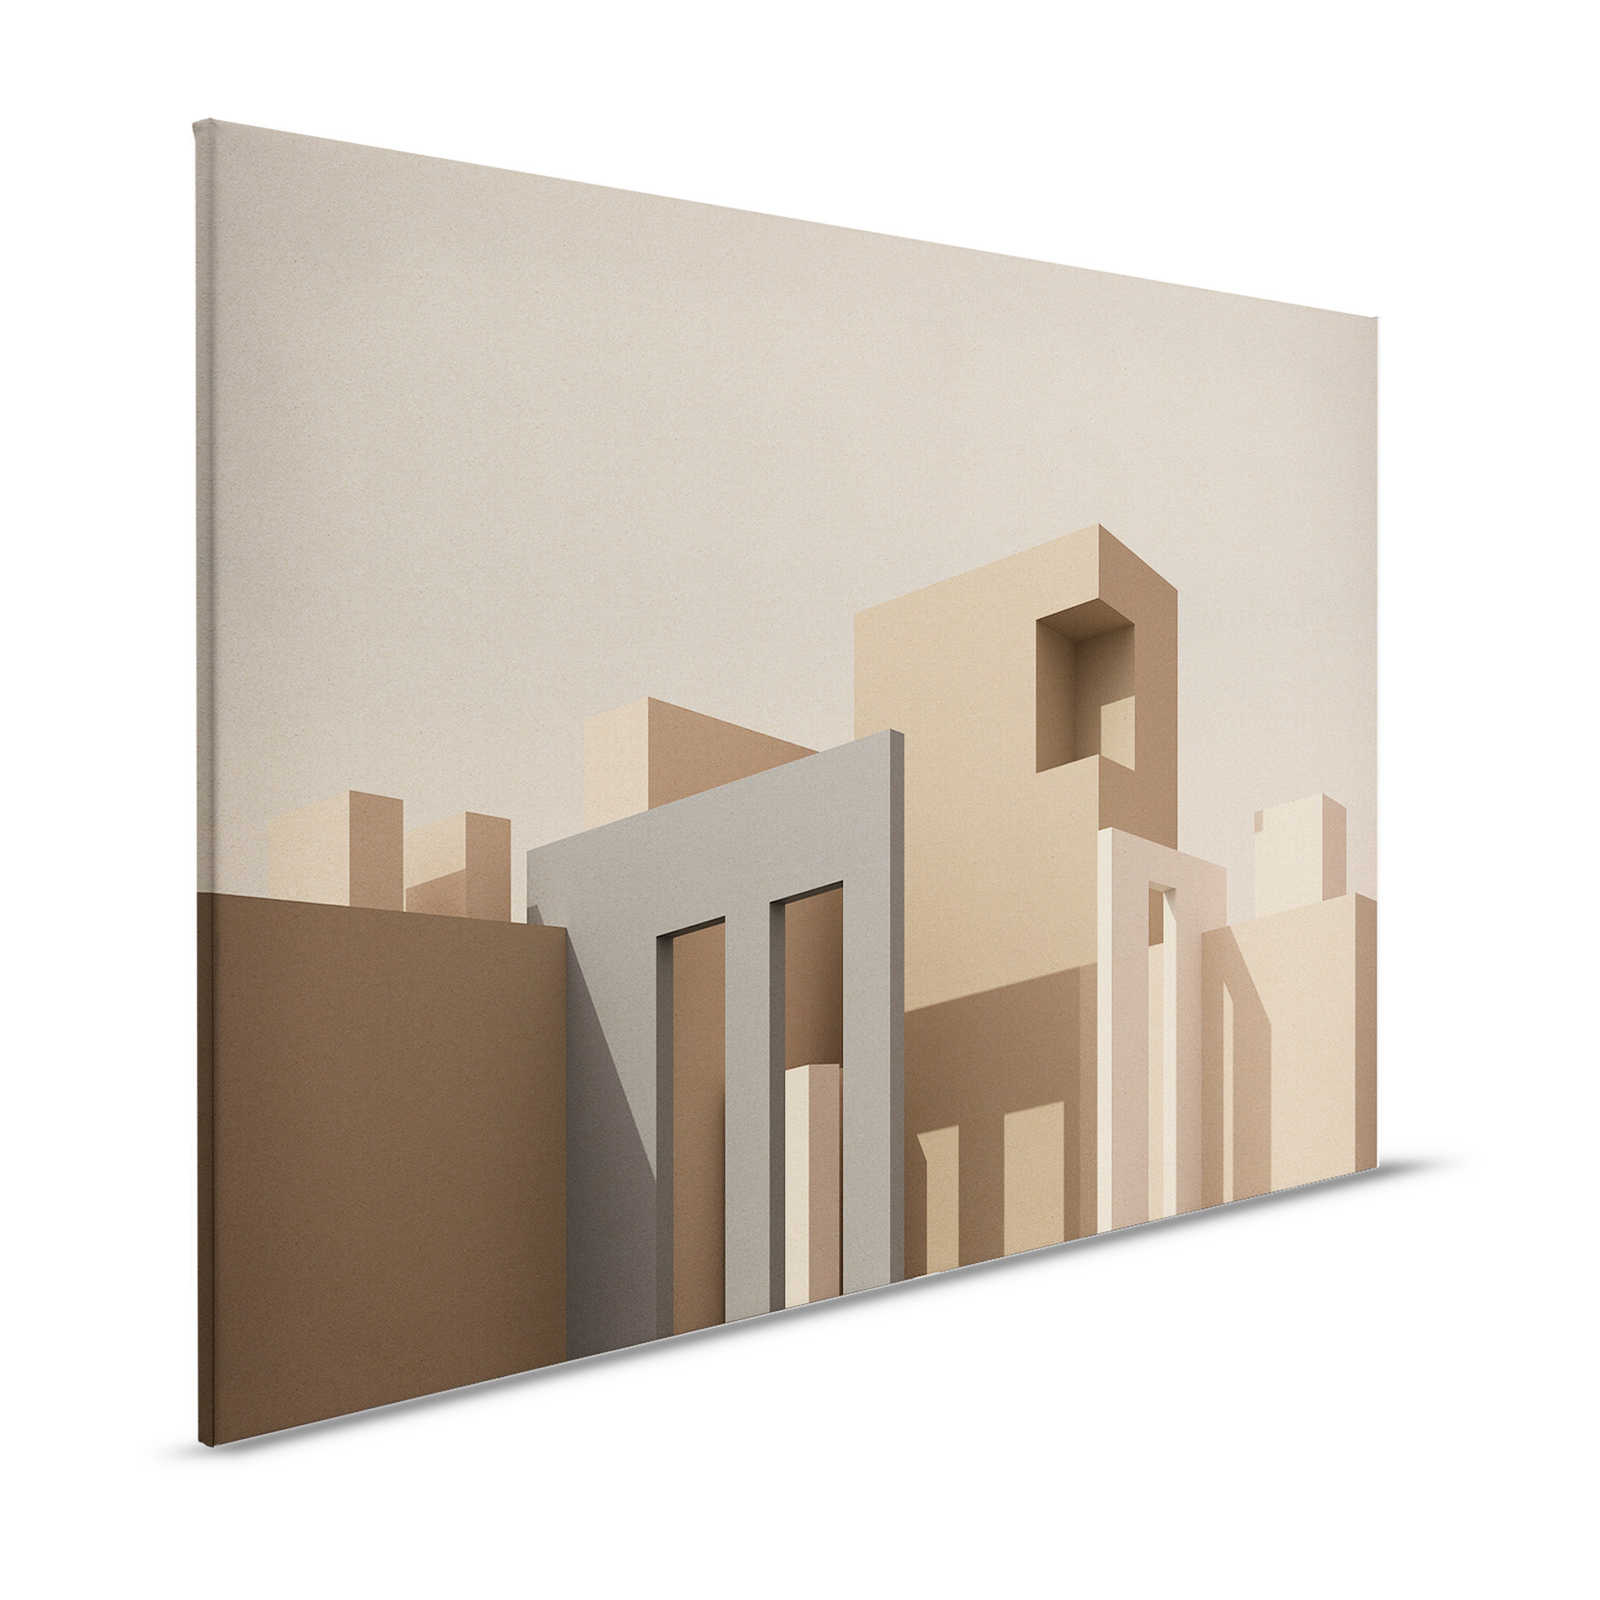 Tangier 1 - Canvas painting Architecture Cube Design in Beige & Grey - 1.20 m x 0.80 m
